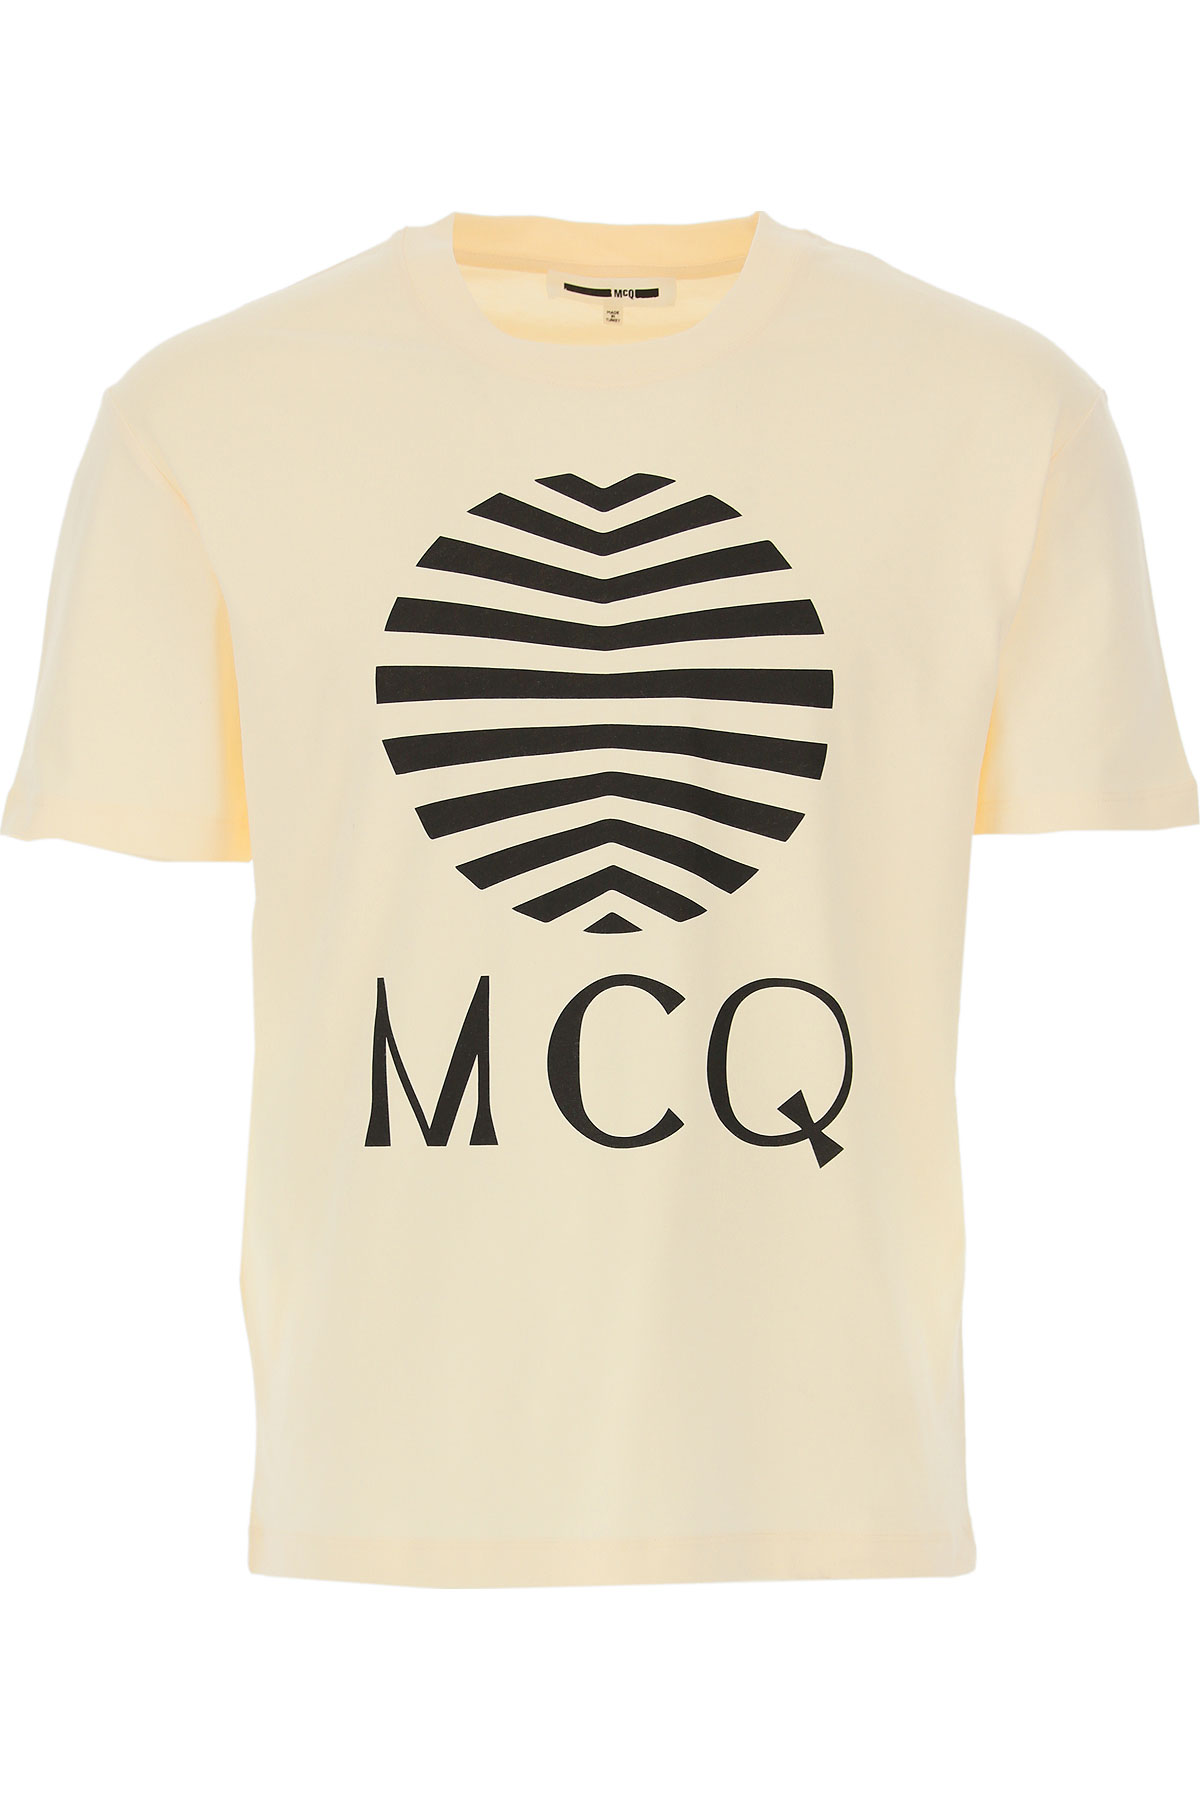 Mens Clothing Alexander McQueen McQ, Style code: 291571-r0t37-9089